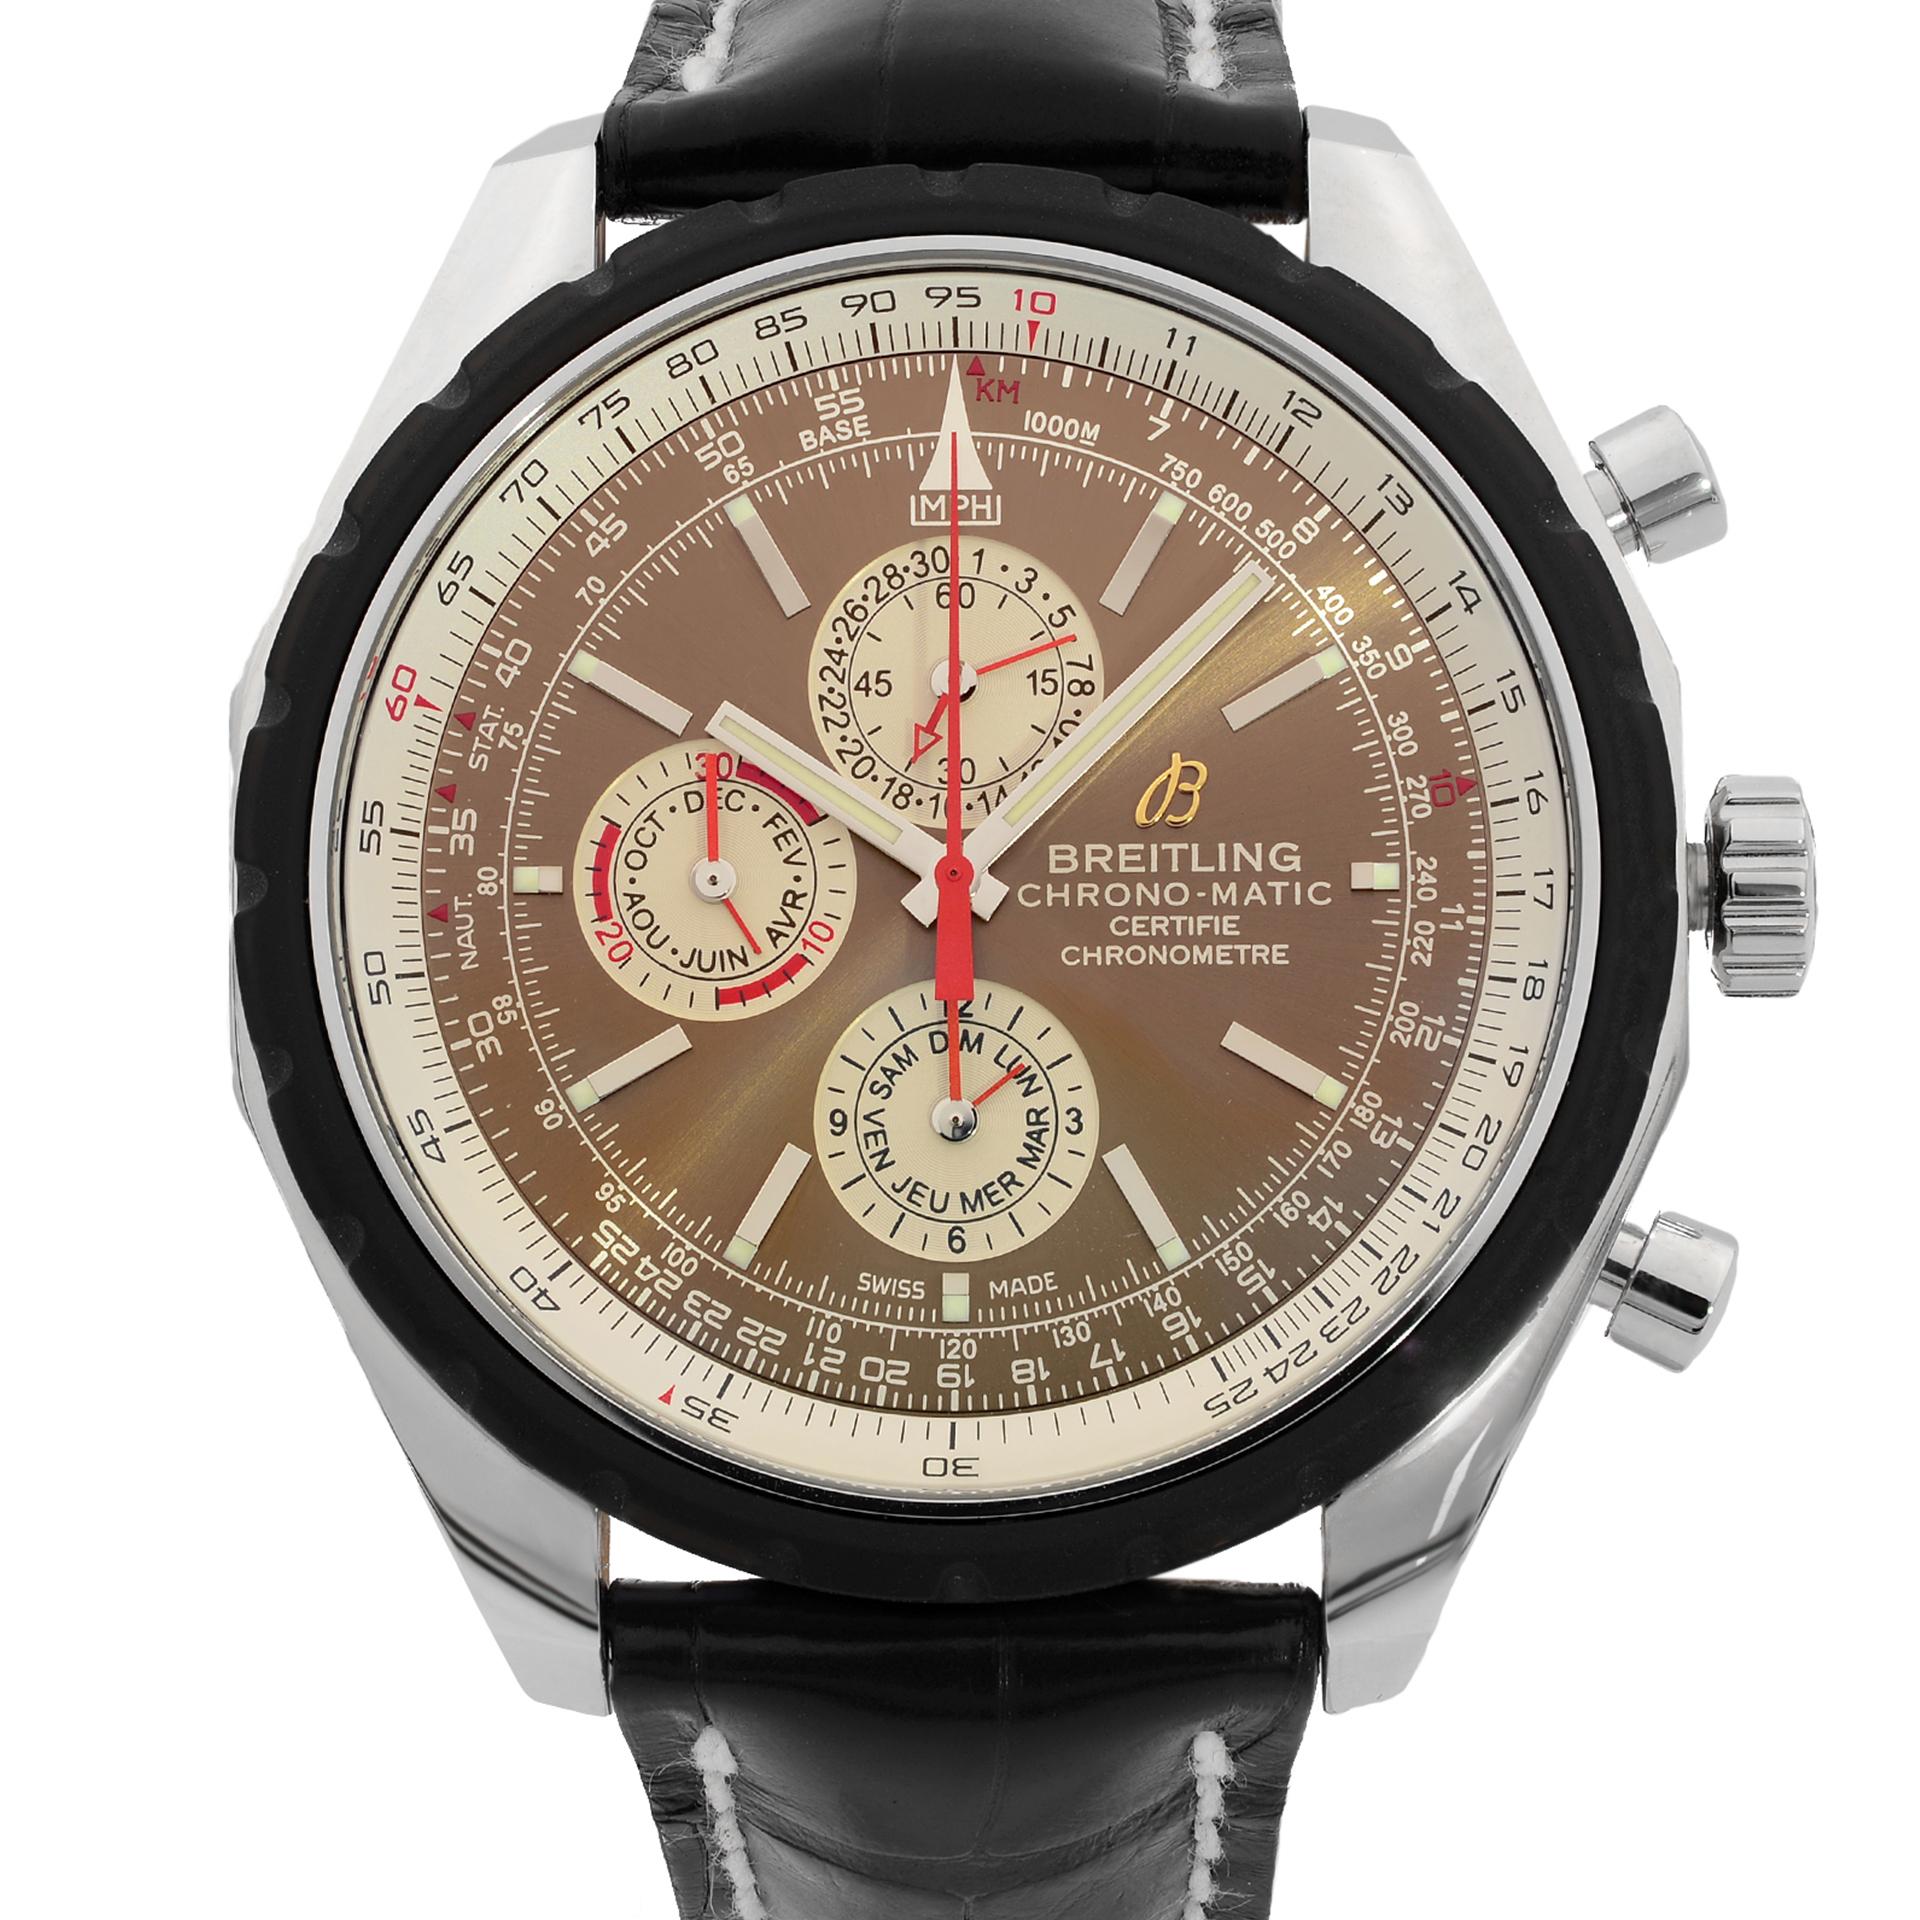 This New Without Tags Breitling Chrono-Matic A1936002/Q573 is a beautiful men's timepiece that is powered by mechanical (hand-winding) movement which is cased in a stainless steel case. It has a round shape face, chronograph, date indicator, small